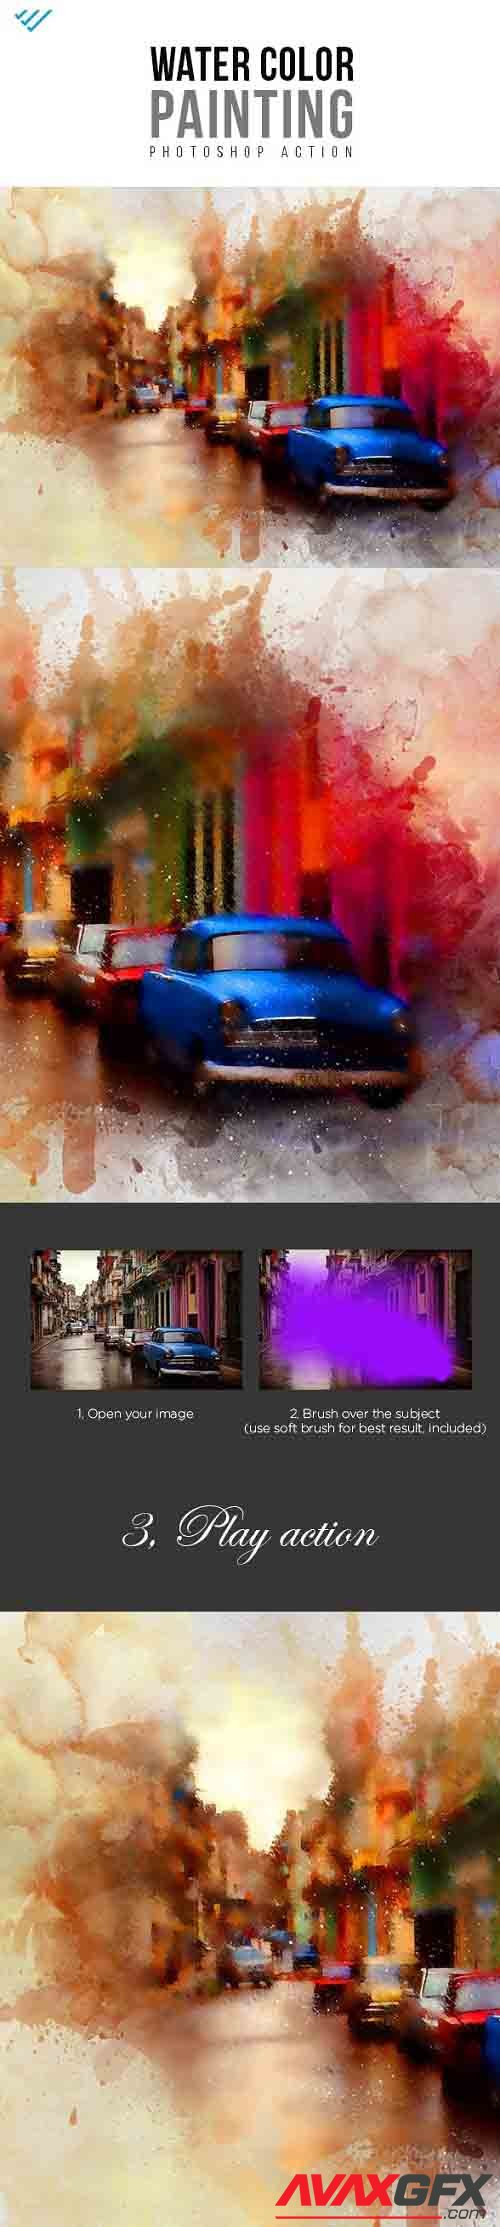 GraphicRiver - Water Color Painting Photoshop Action 18707132